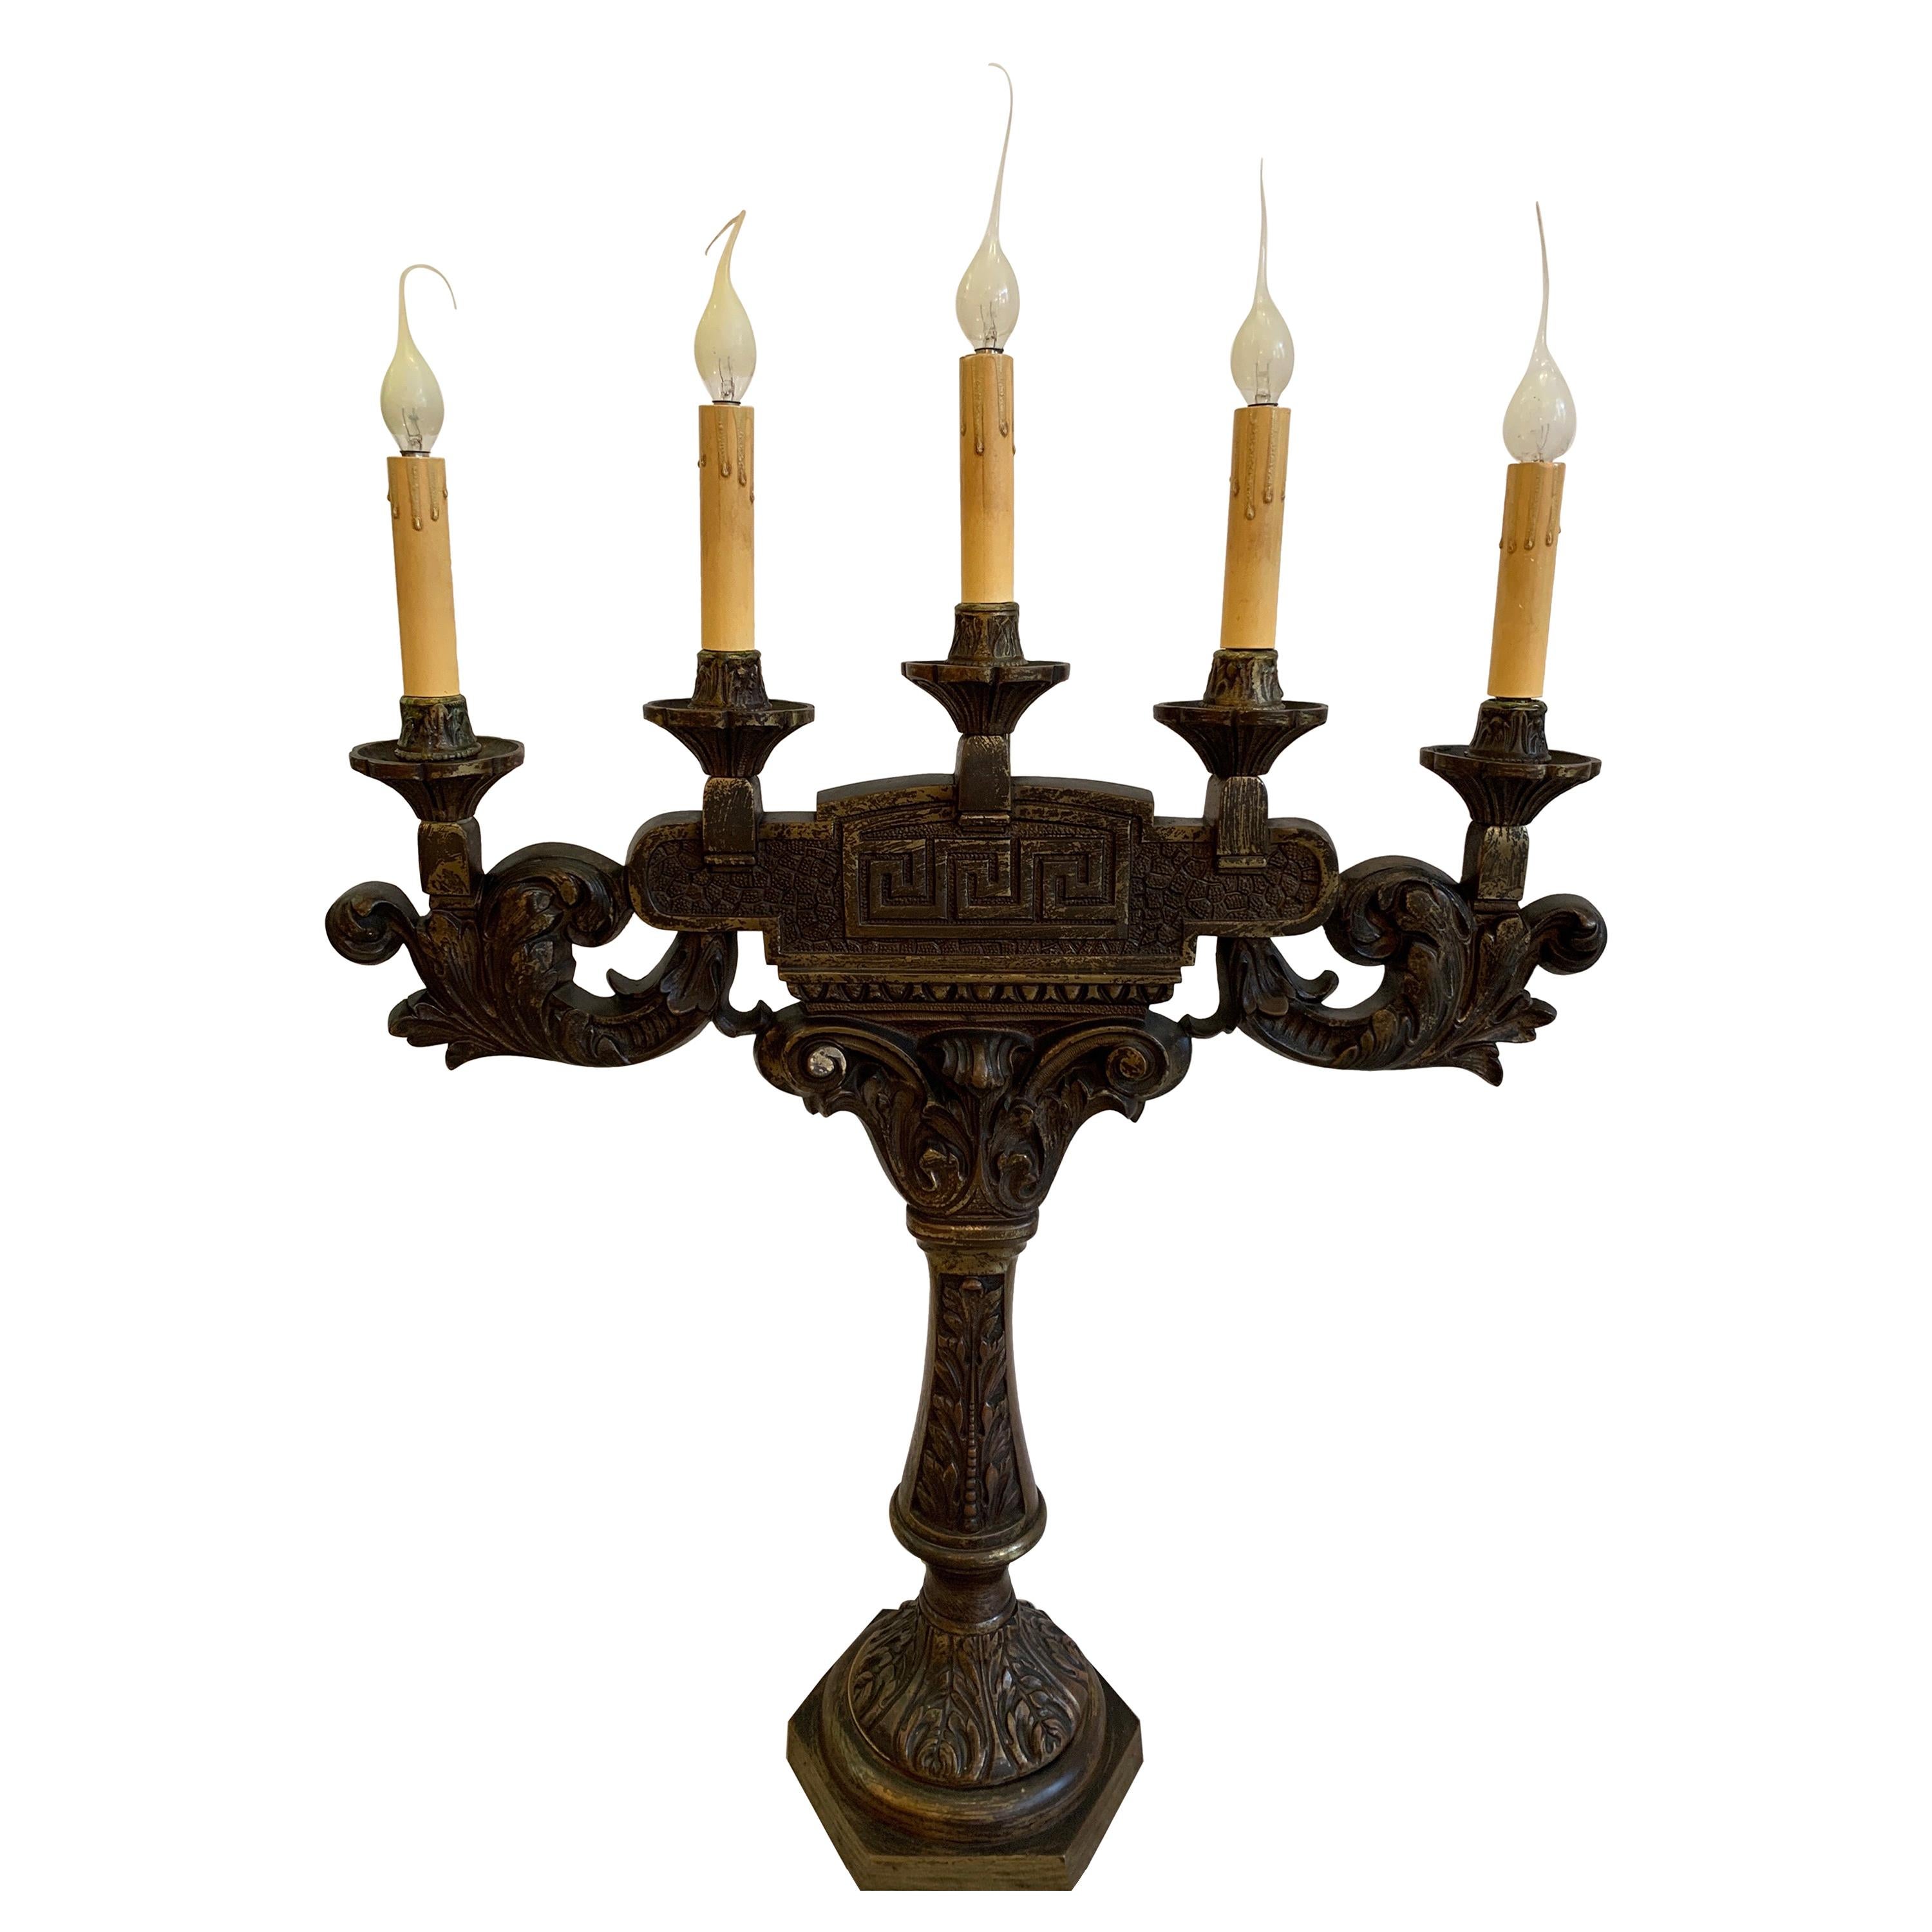 19th century bronze candelabras now electrified can be converted back to candles. Nice patination on bronze, heavy weight for stability. Back plates added. Great gothic/ medieval look.
Dimensions: 24